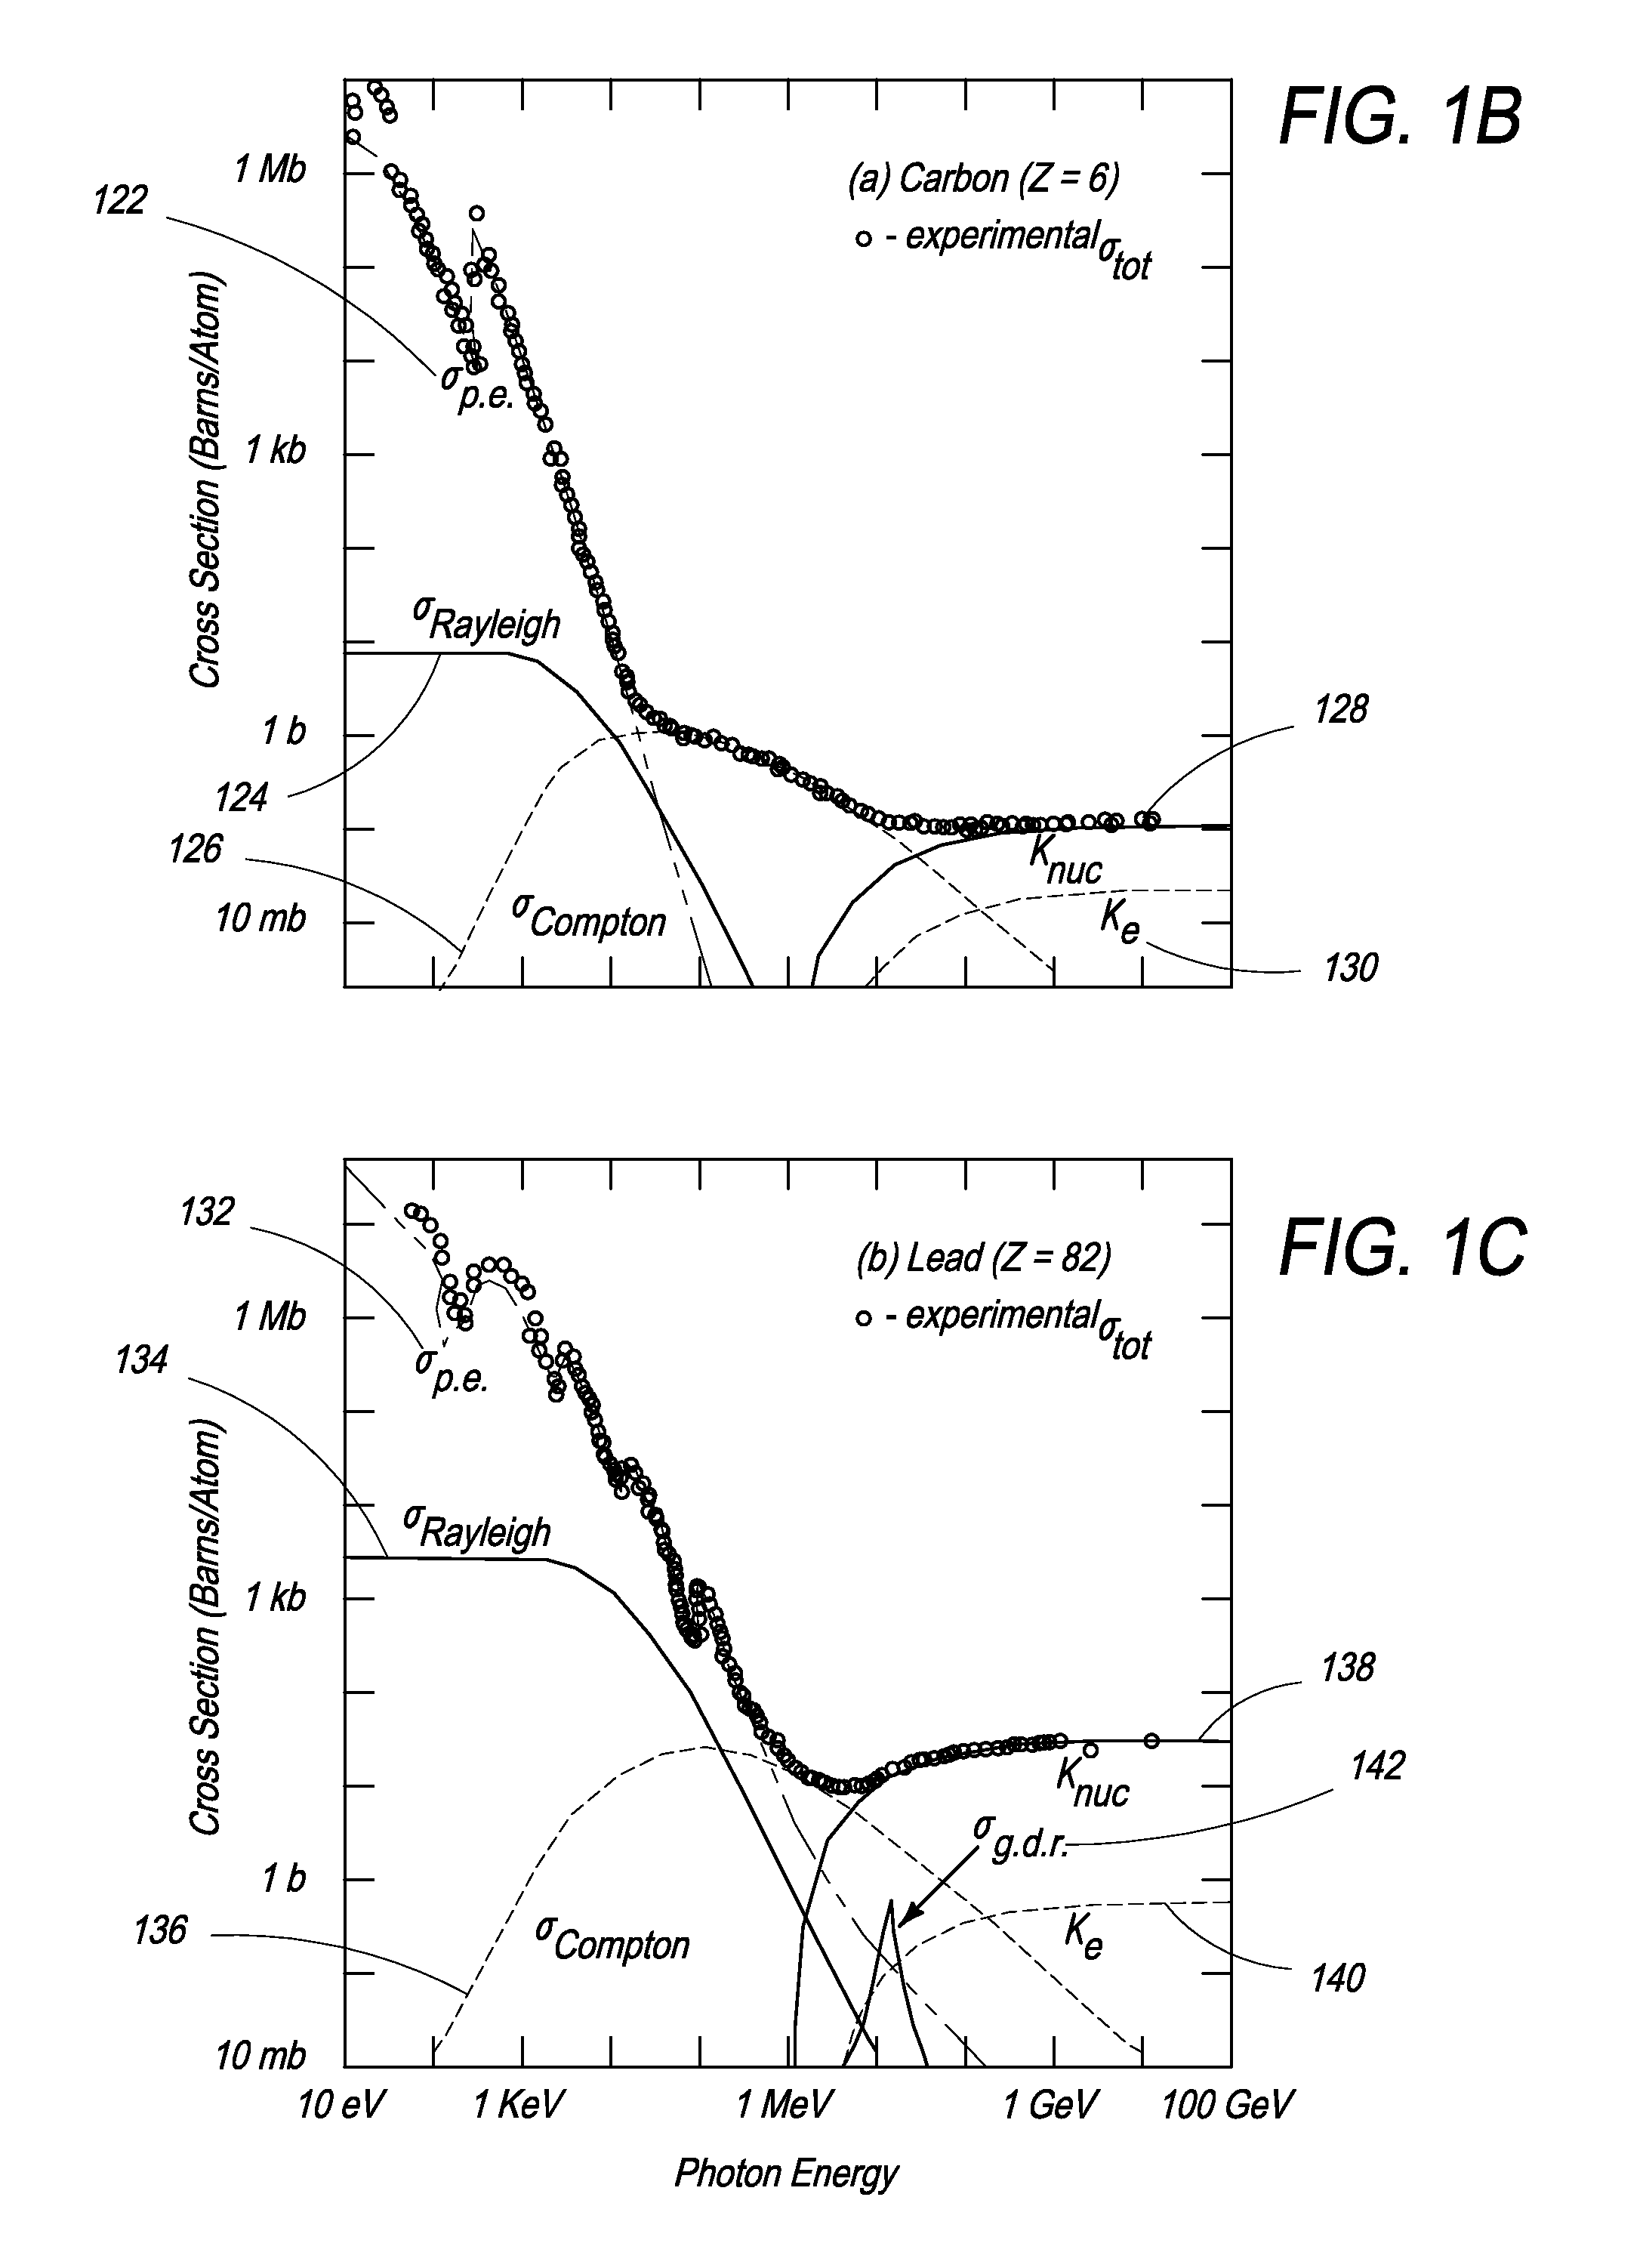 Method and System for Extracting Spectroscopic Information from Images and Waveforms